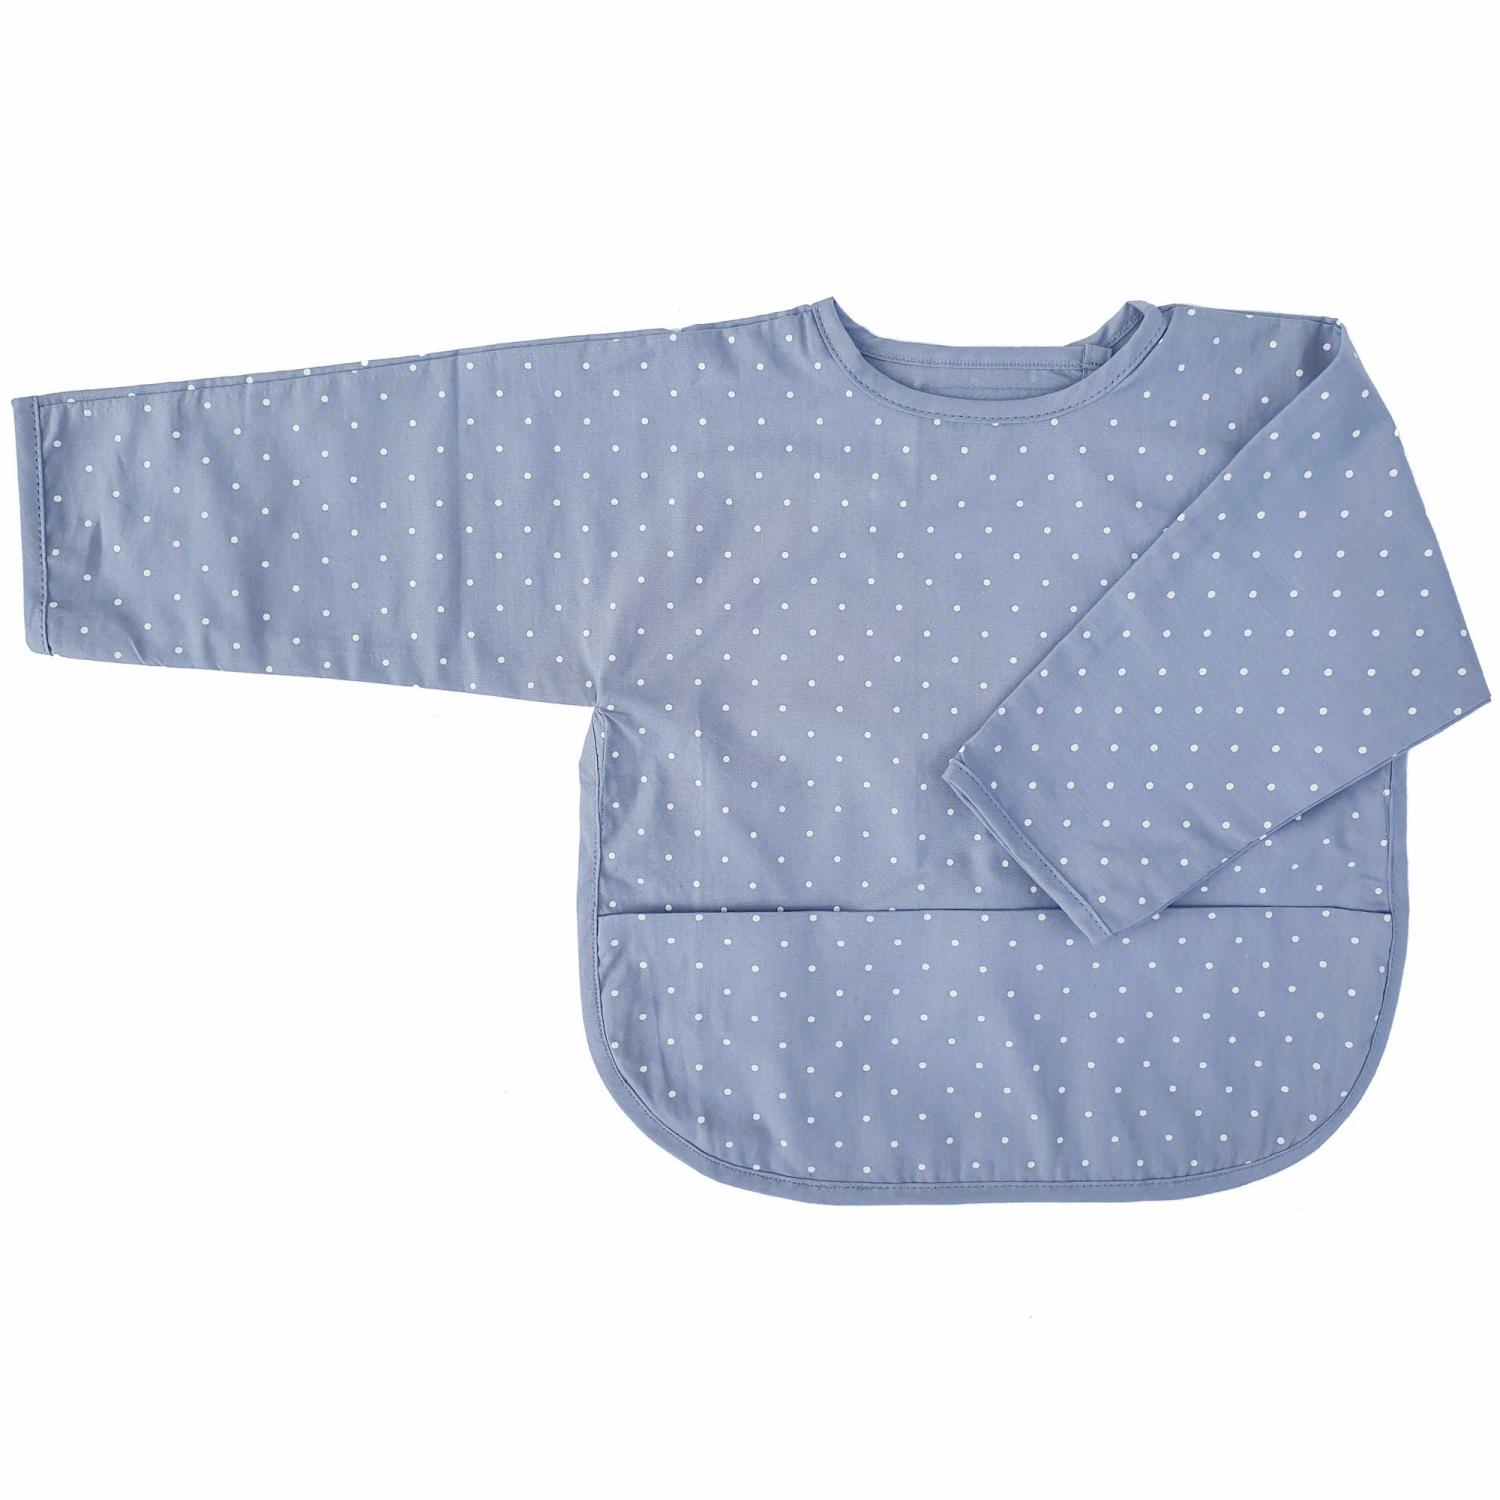 Bib with sleeves forever blue dotty